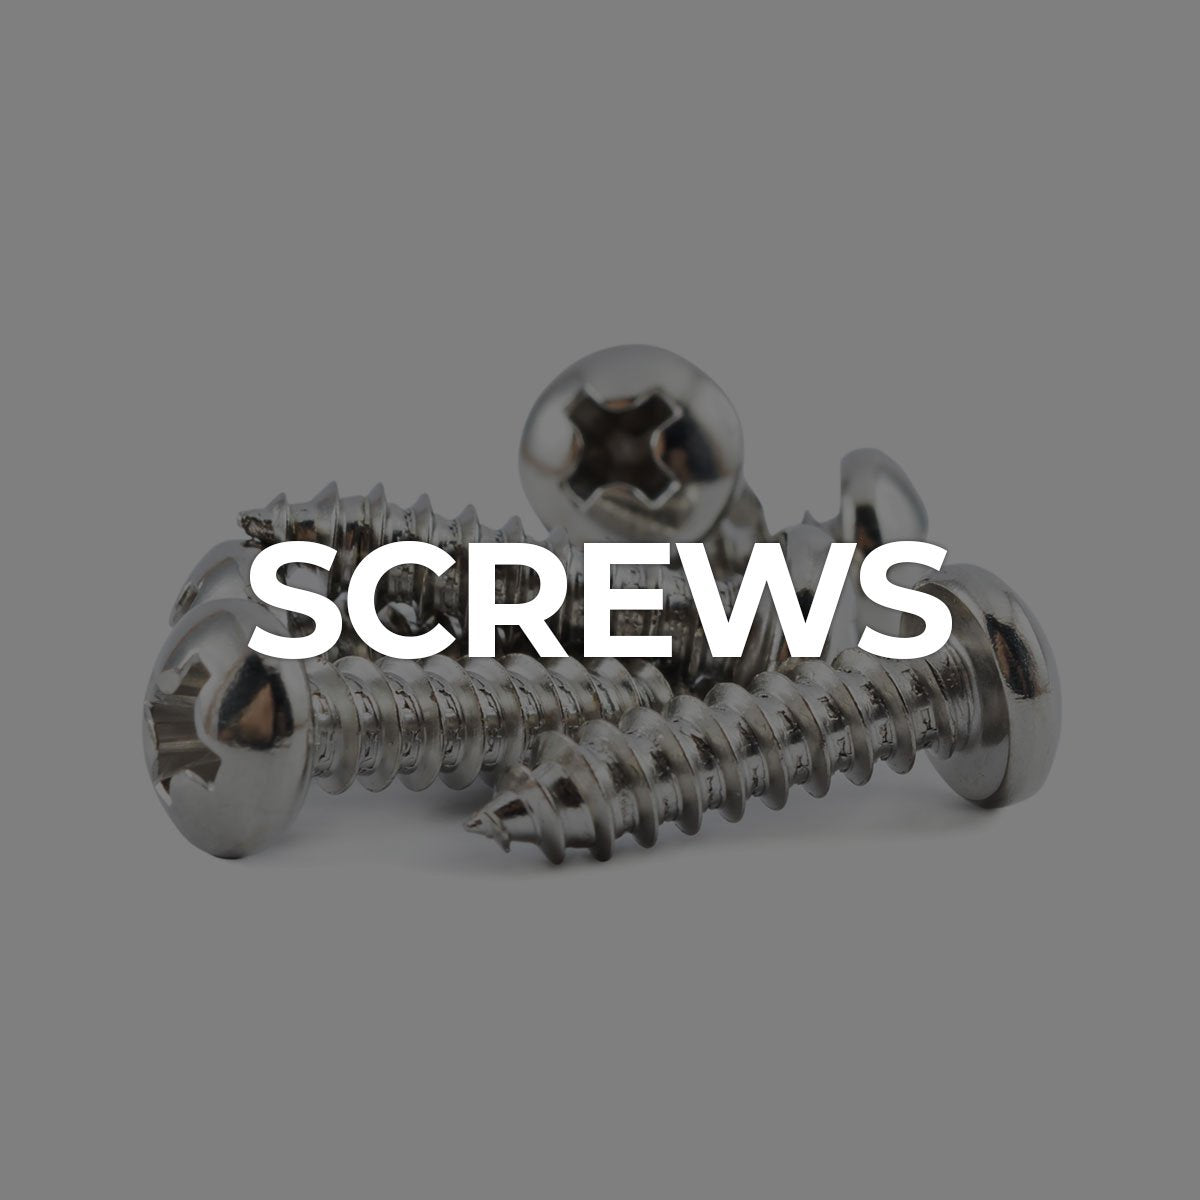 Search by Collections: Screws